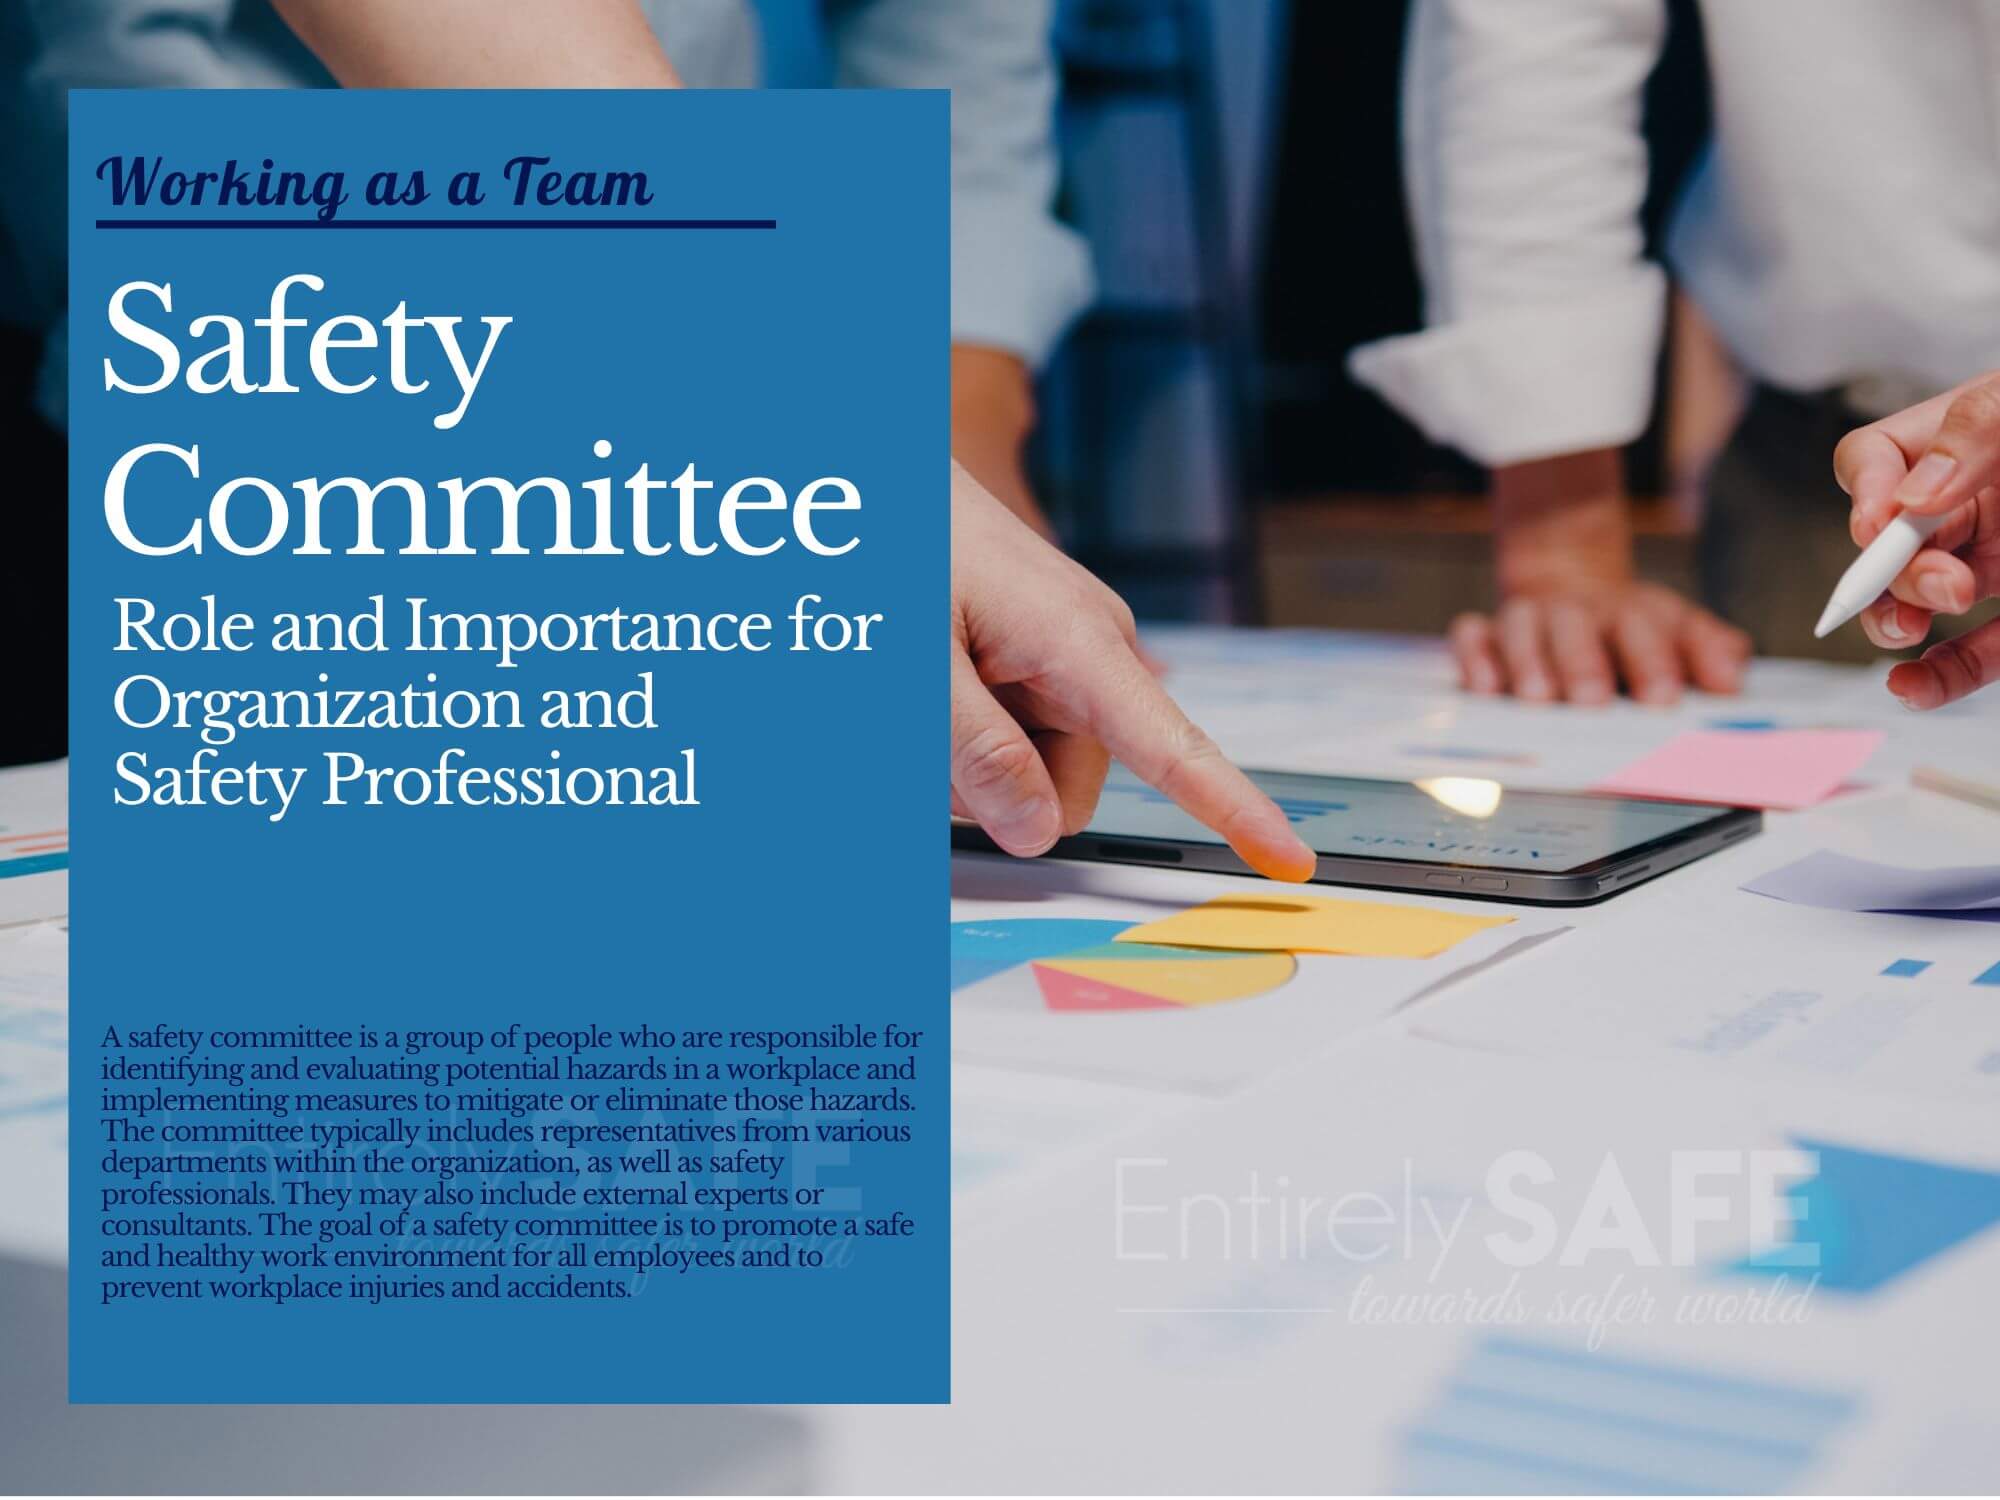 Role and Importance of Safety Committee for Organization and Safety Professionals